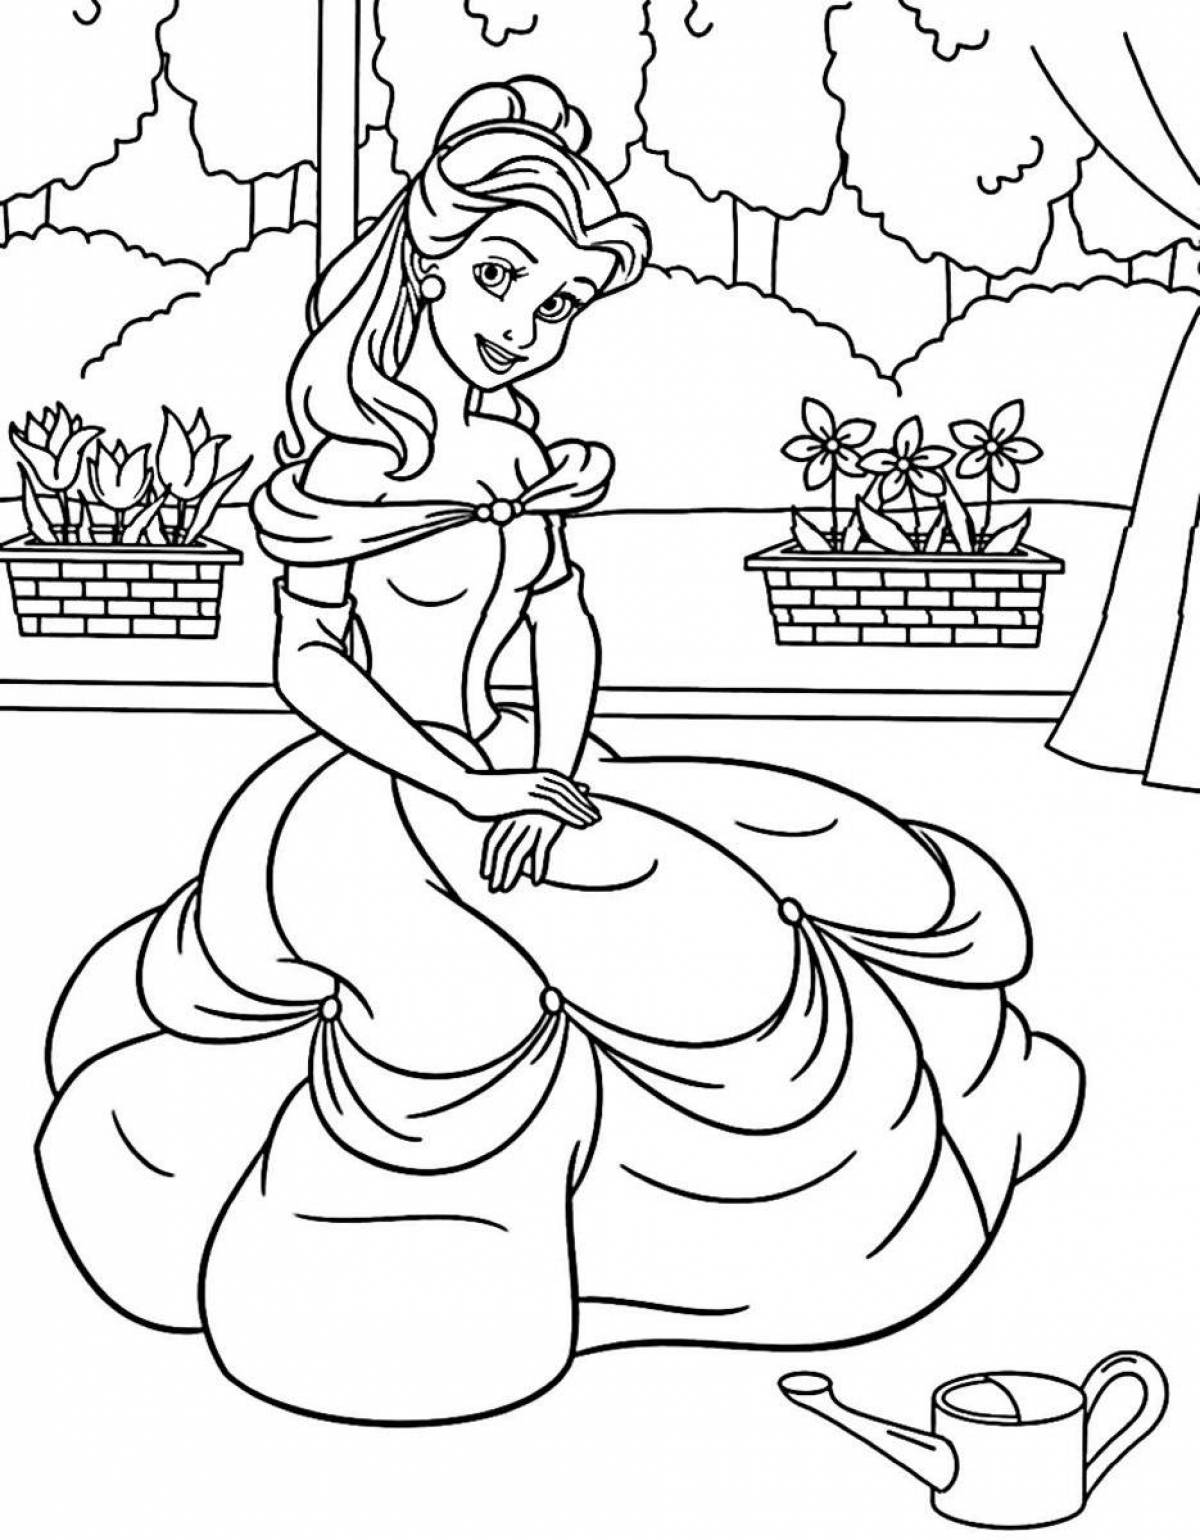 Royal princess coloring pages for kids